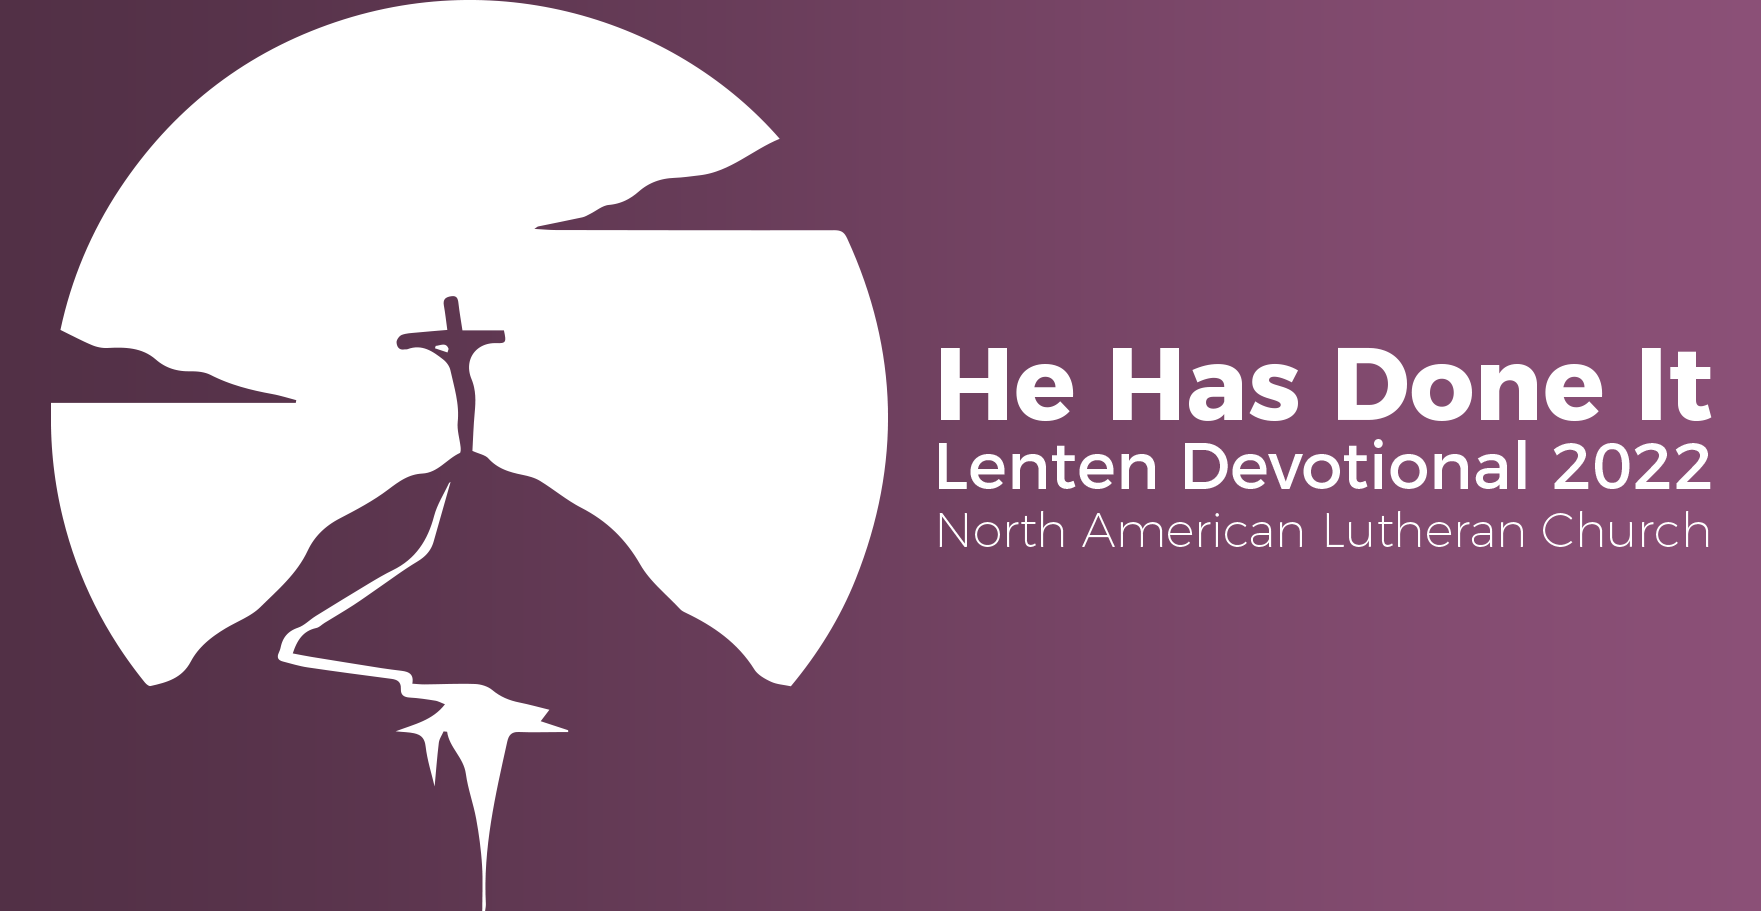 March 17, 2022 | Thursday of the Week of Lent II